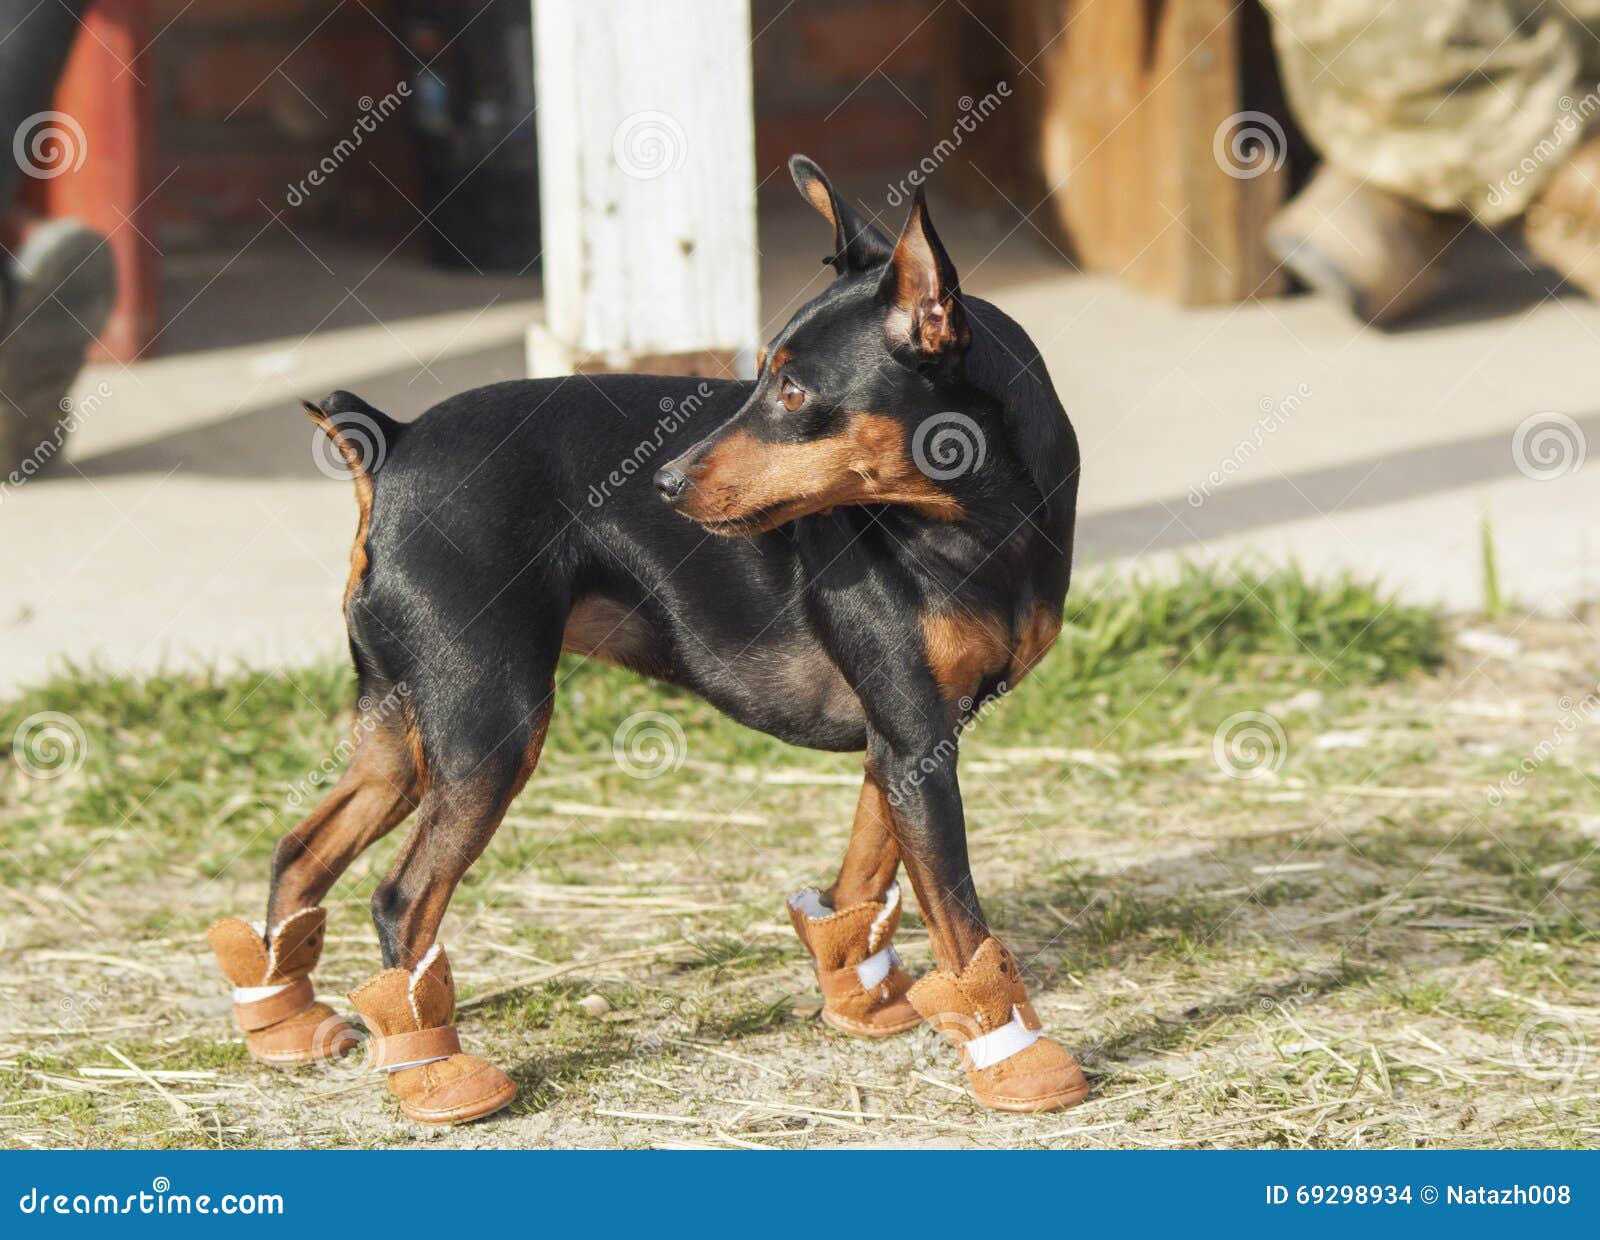 Big Black Dog And The Little Brown Are Standing Stock Photo